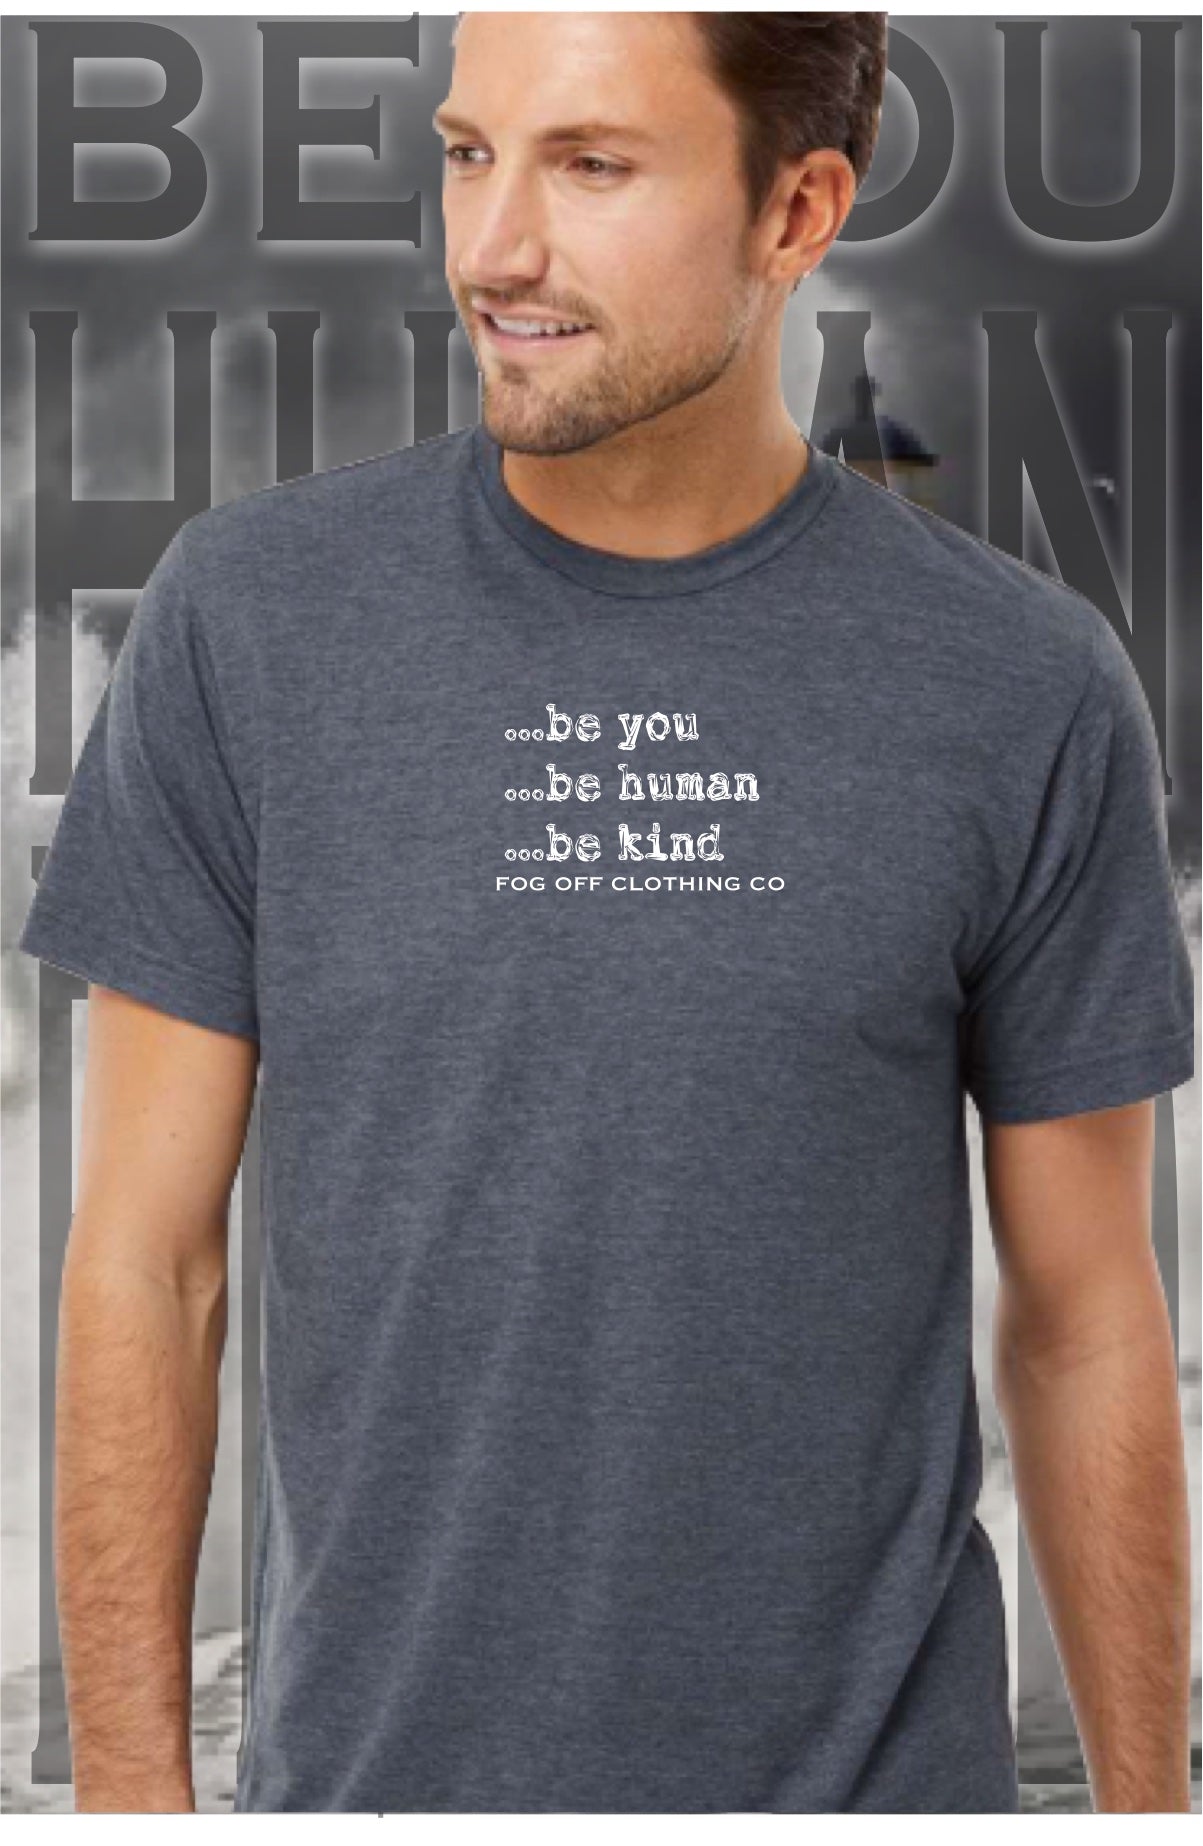 NEW BE YOU, BE KIND  MENS T